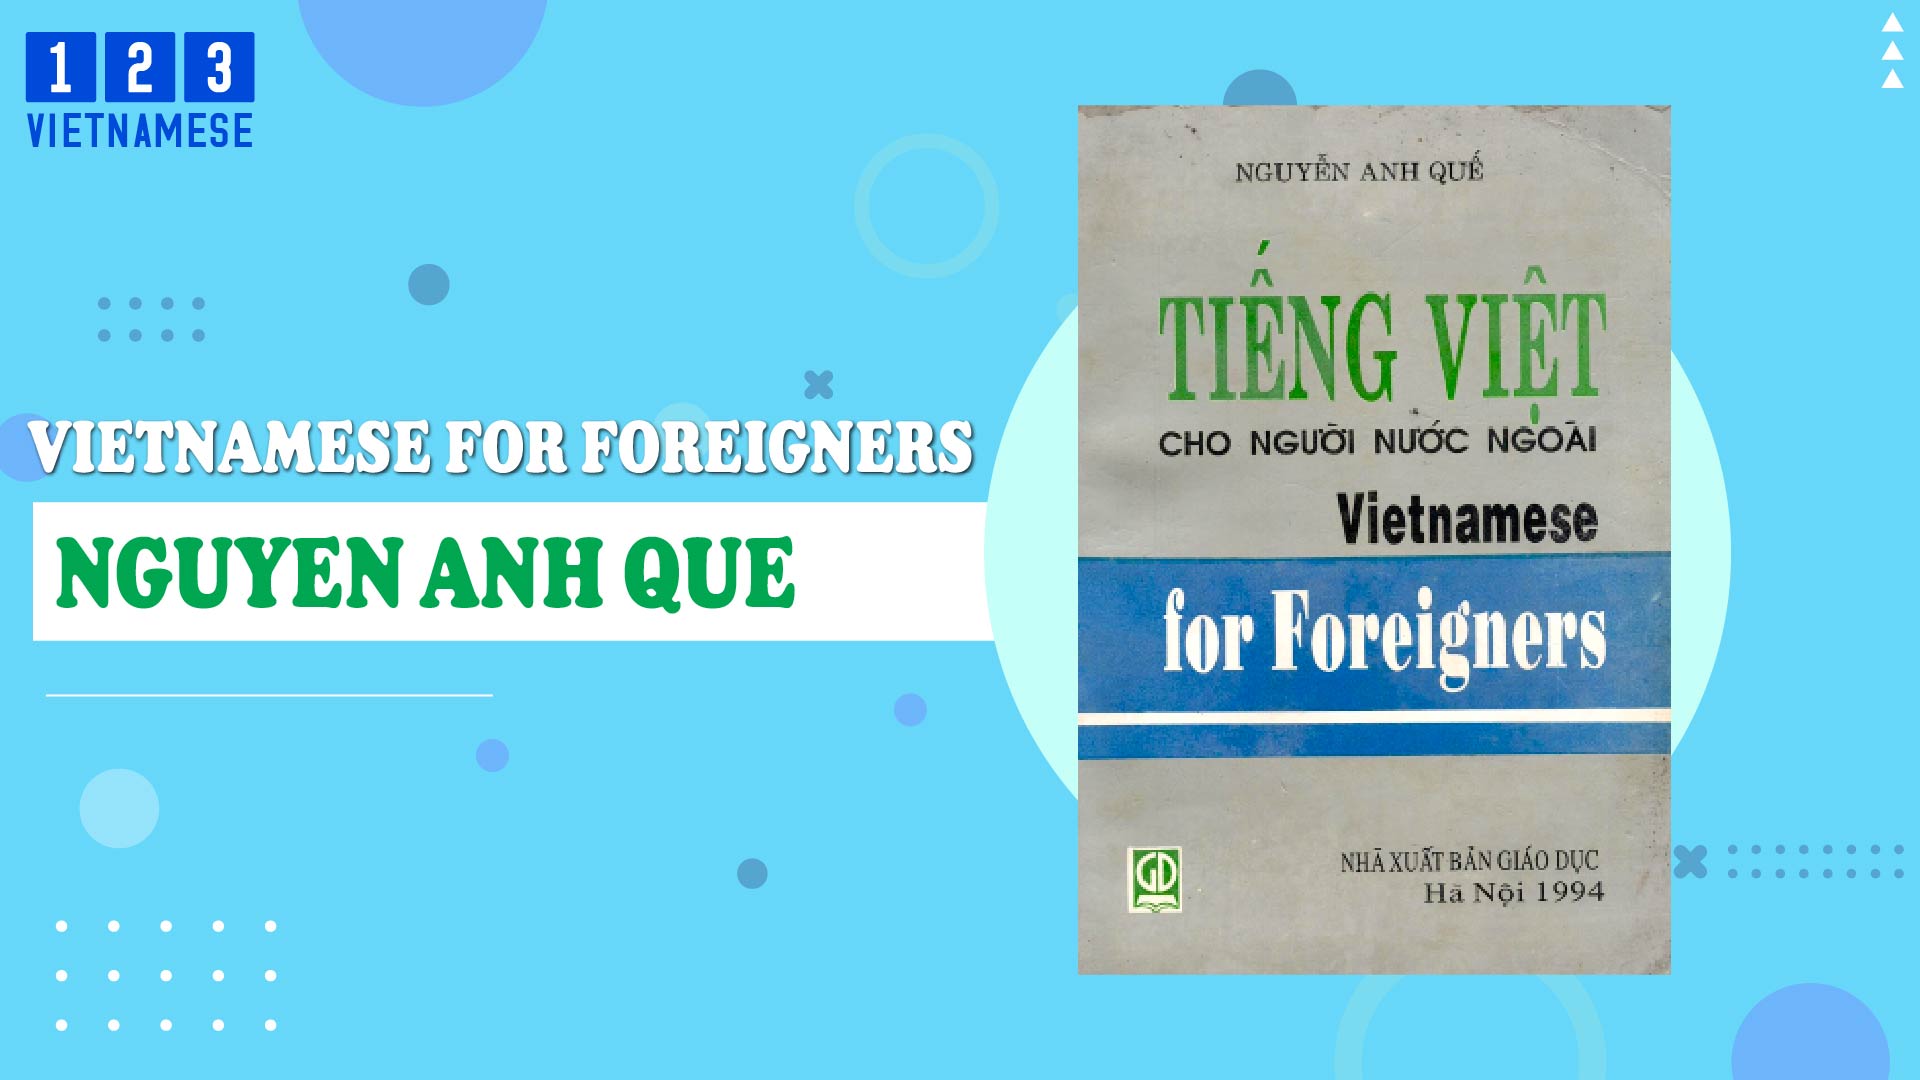 Vietnamese for Foreigners - Nguyen Anh Que [Learning Vietnamese book]